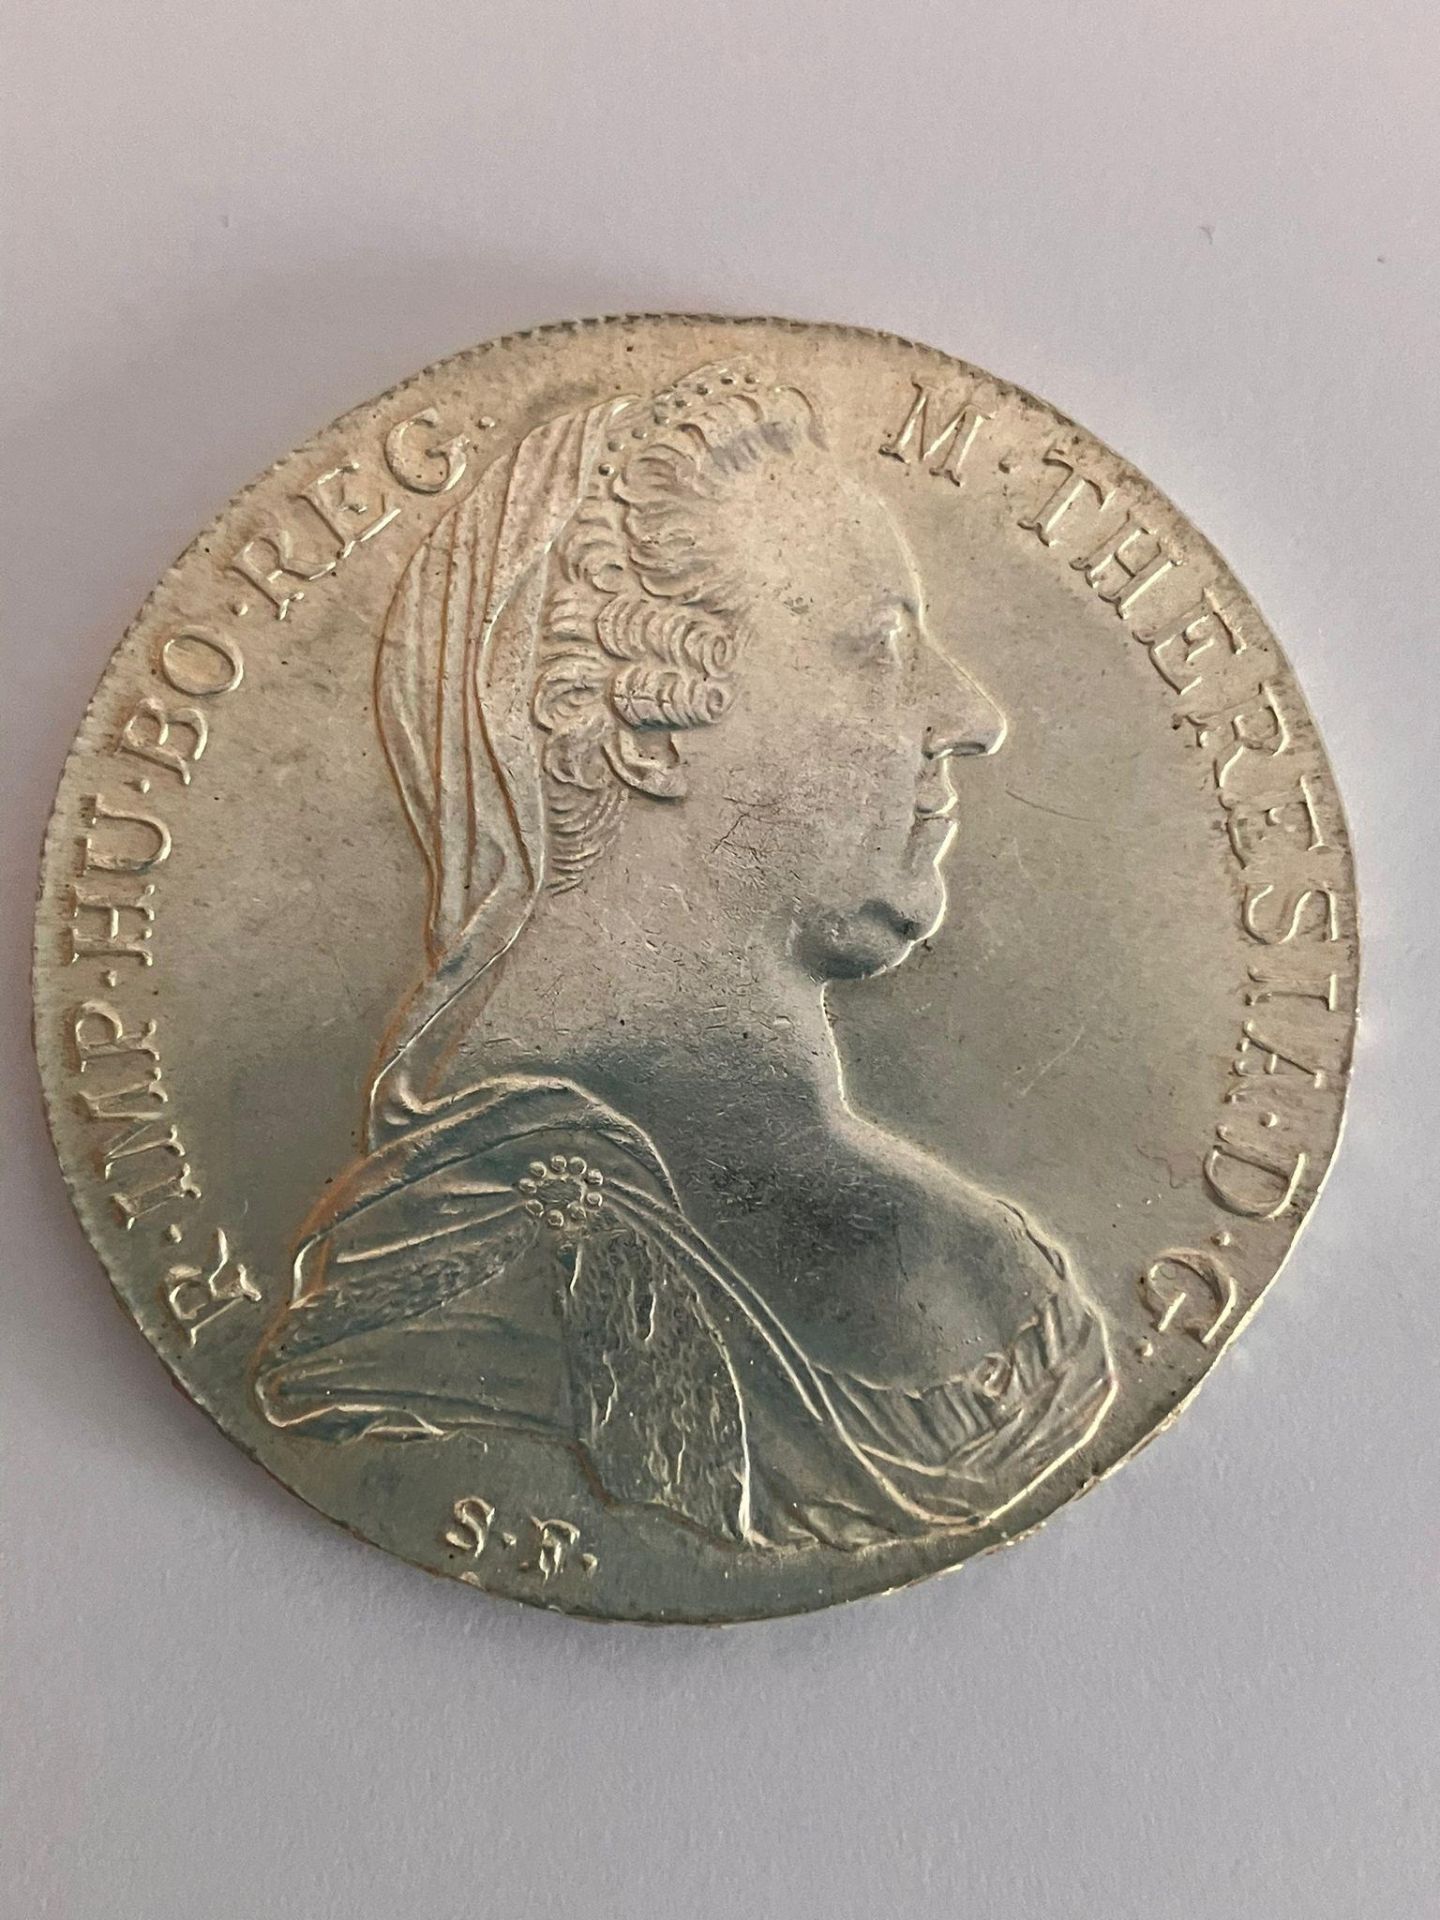 Vintage SILVER MARIE THERESA THALER COIN.1780. Conditioning as new and uncirculated. Extremely - Bild 2 aus 3